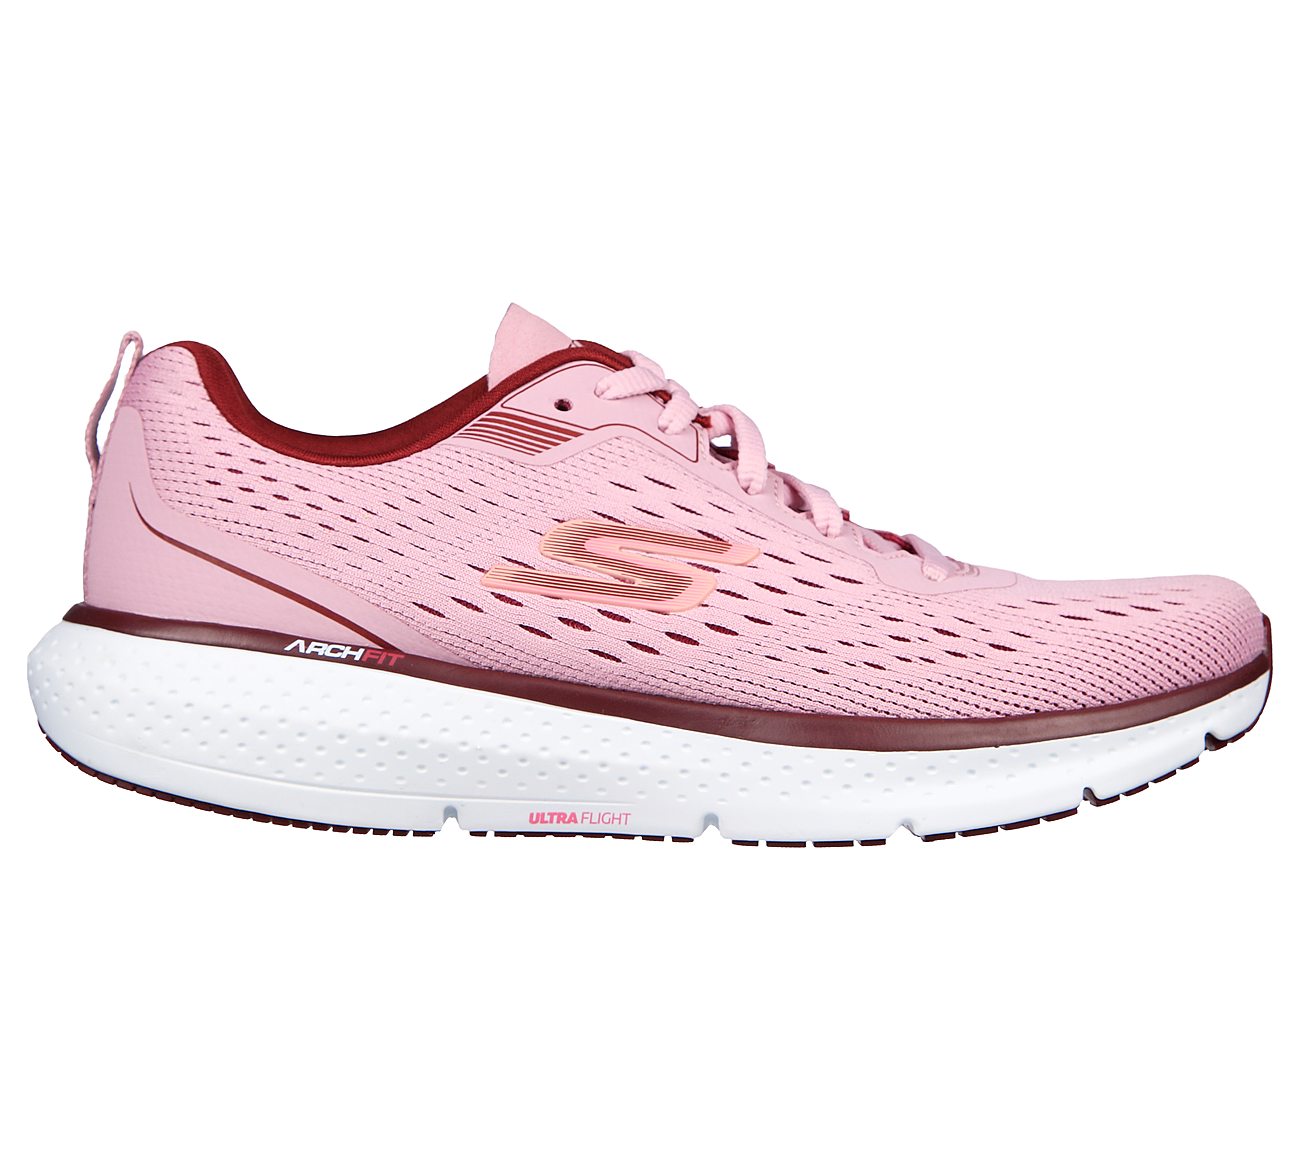 GO RUN PURE 3, PPINK Footwear Lateral View